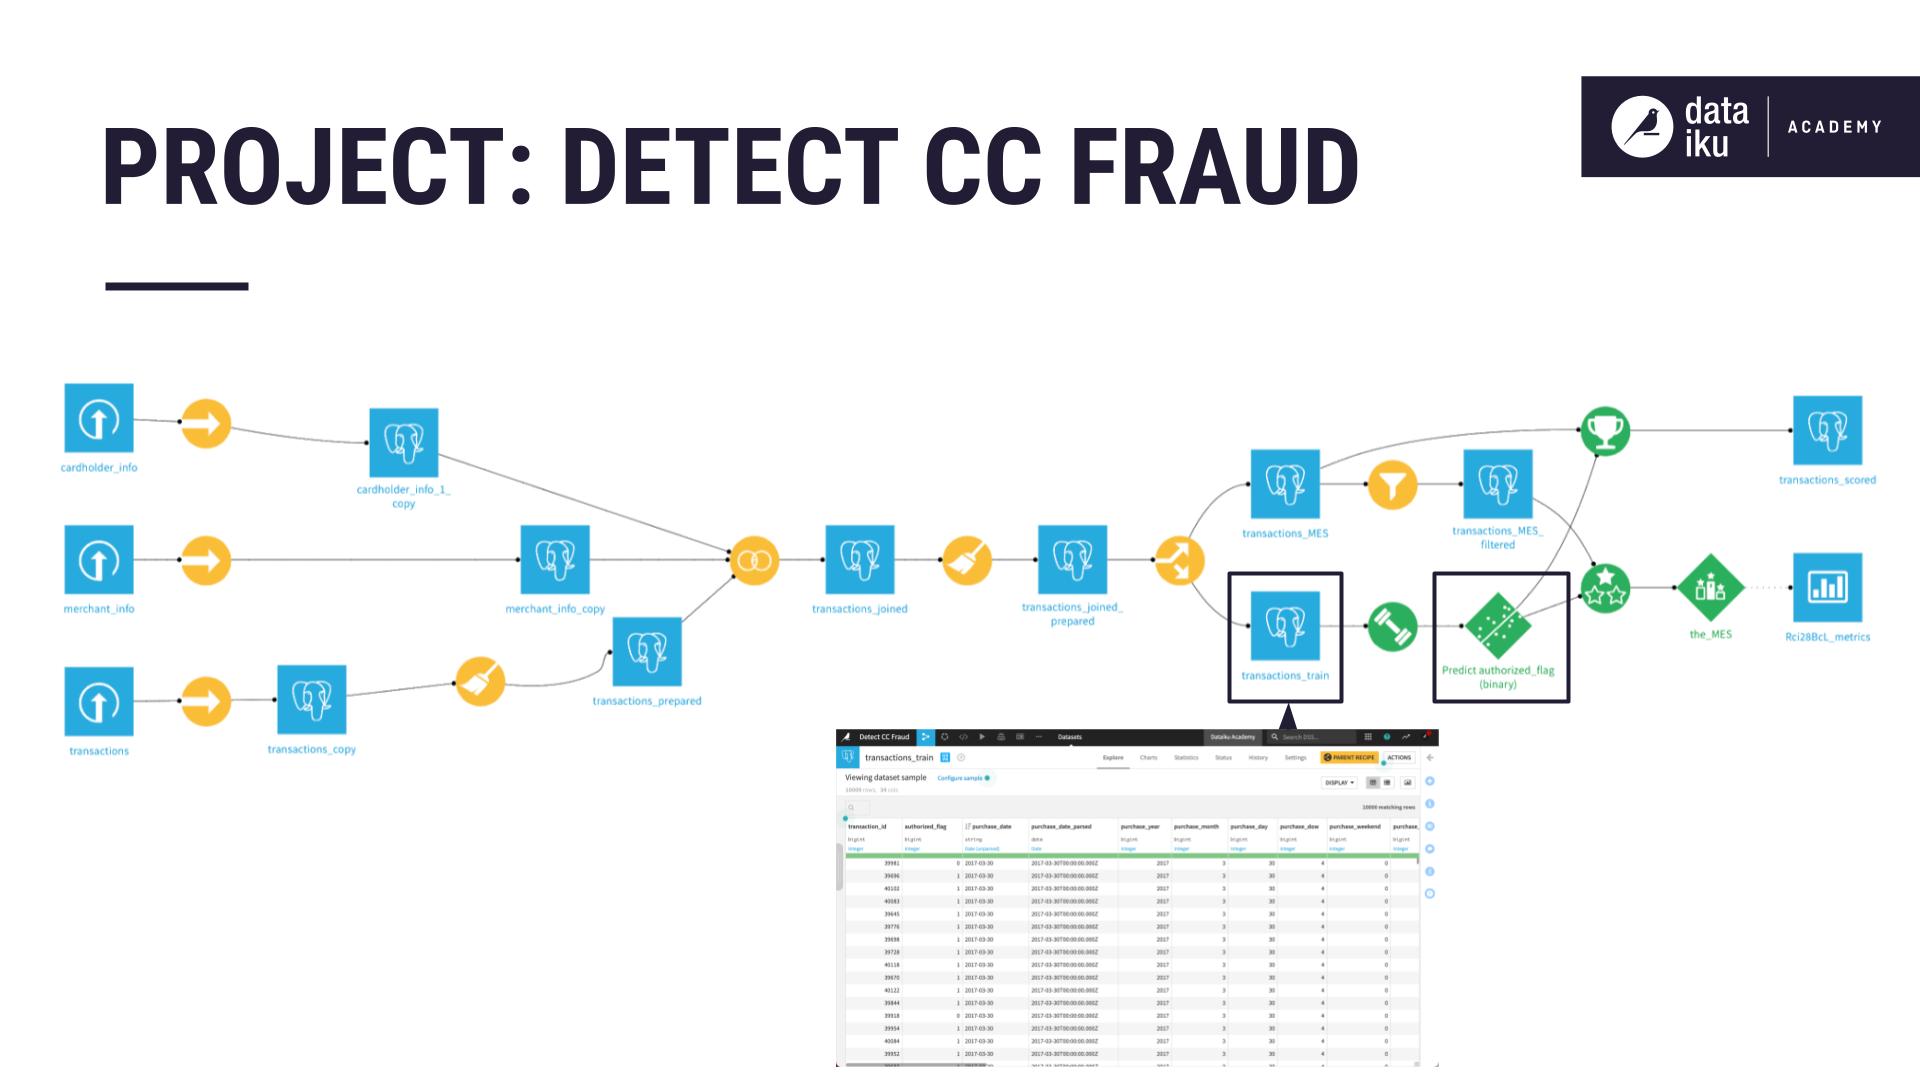 ../../_images/project-detect-cc-fraud.jpg